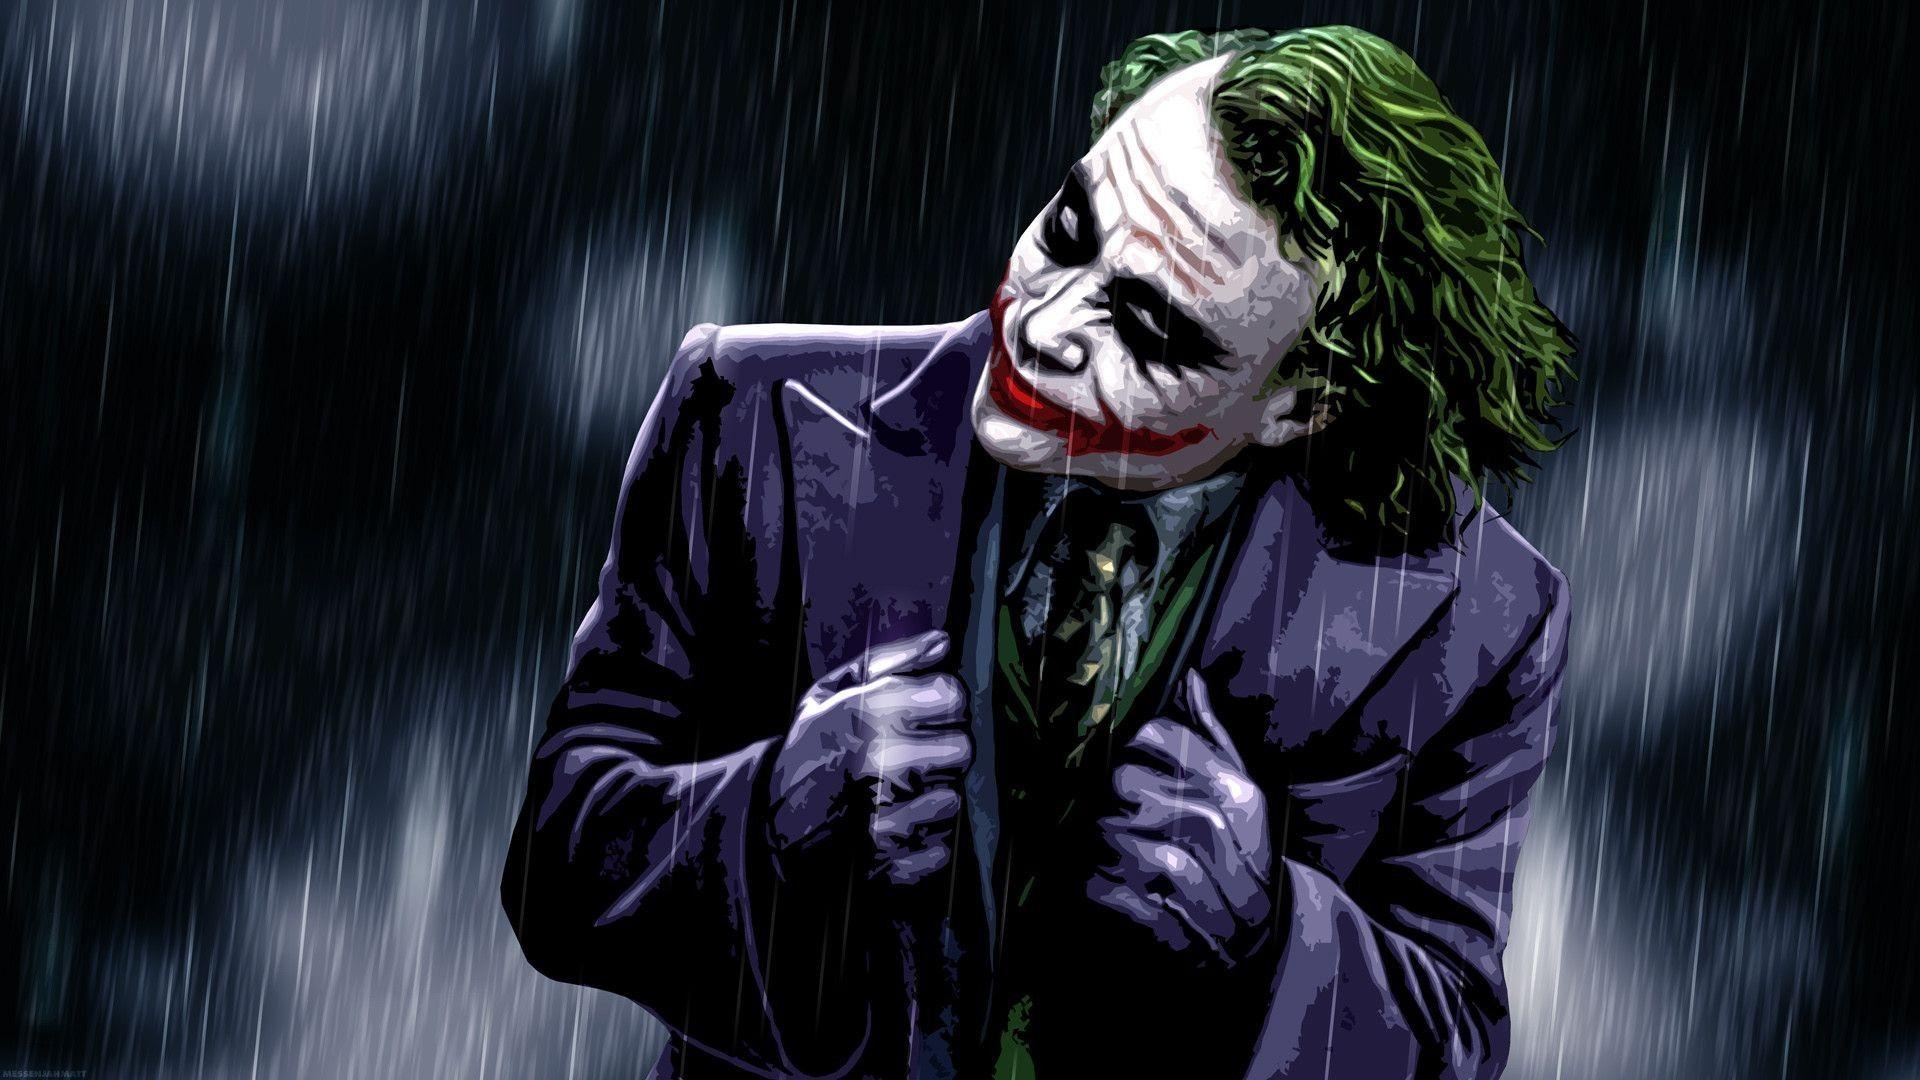 Joker backgroundDownload free awesome full HD background